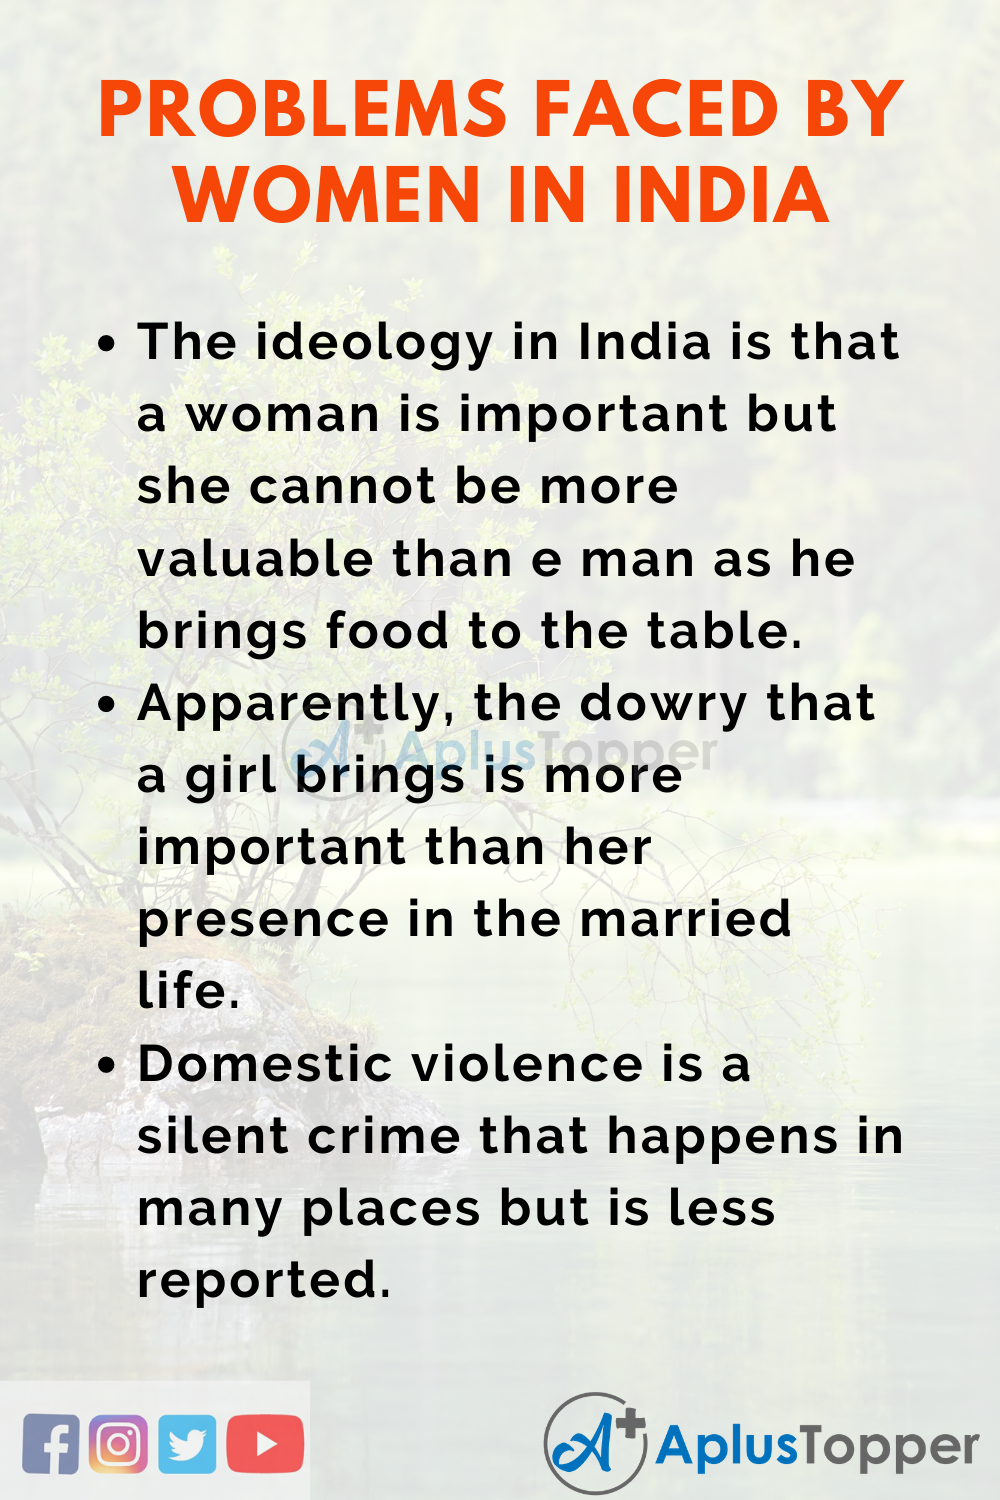 Problems Faced by Women in India